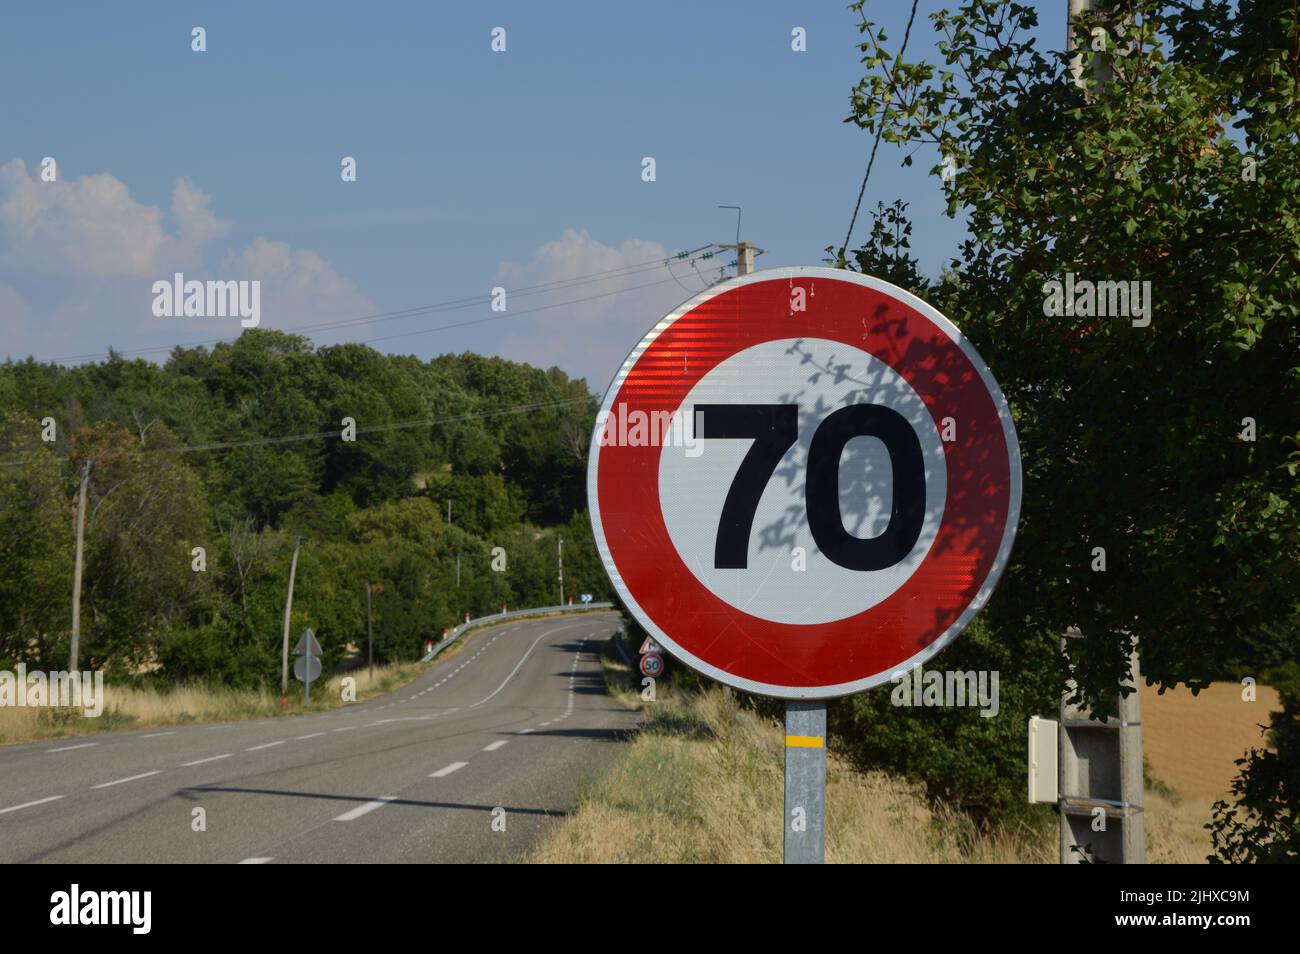 Speed limit sign from france Stock Photo